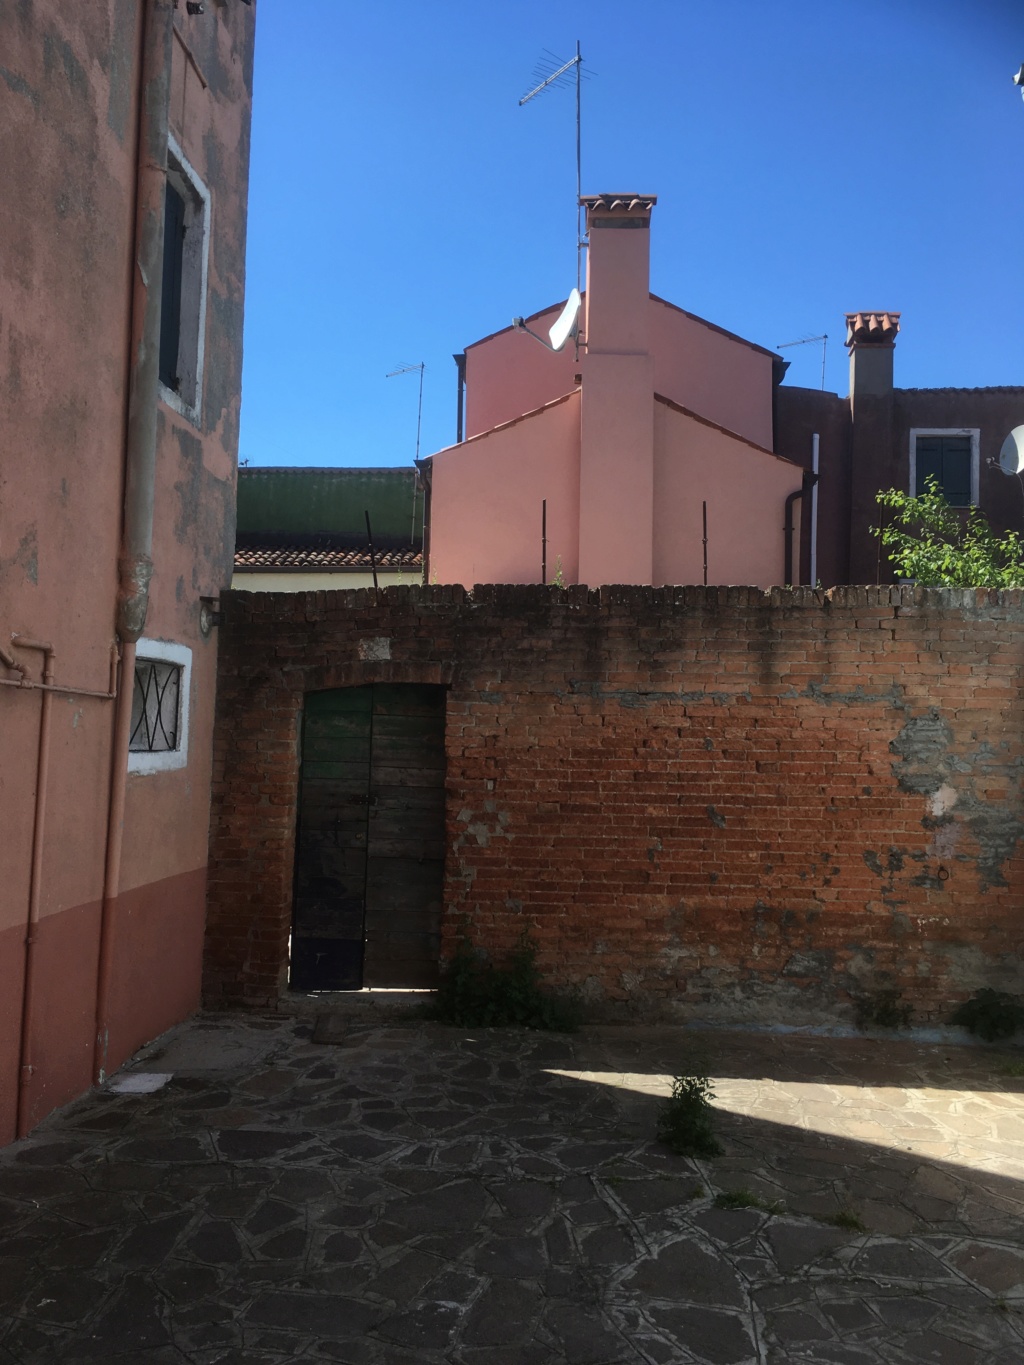 Venise 2019 - Page 2 Img_0639